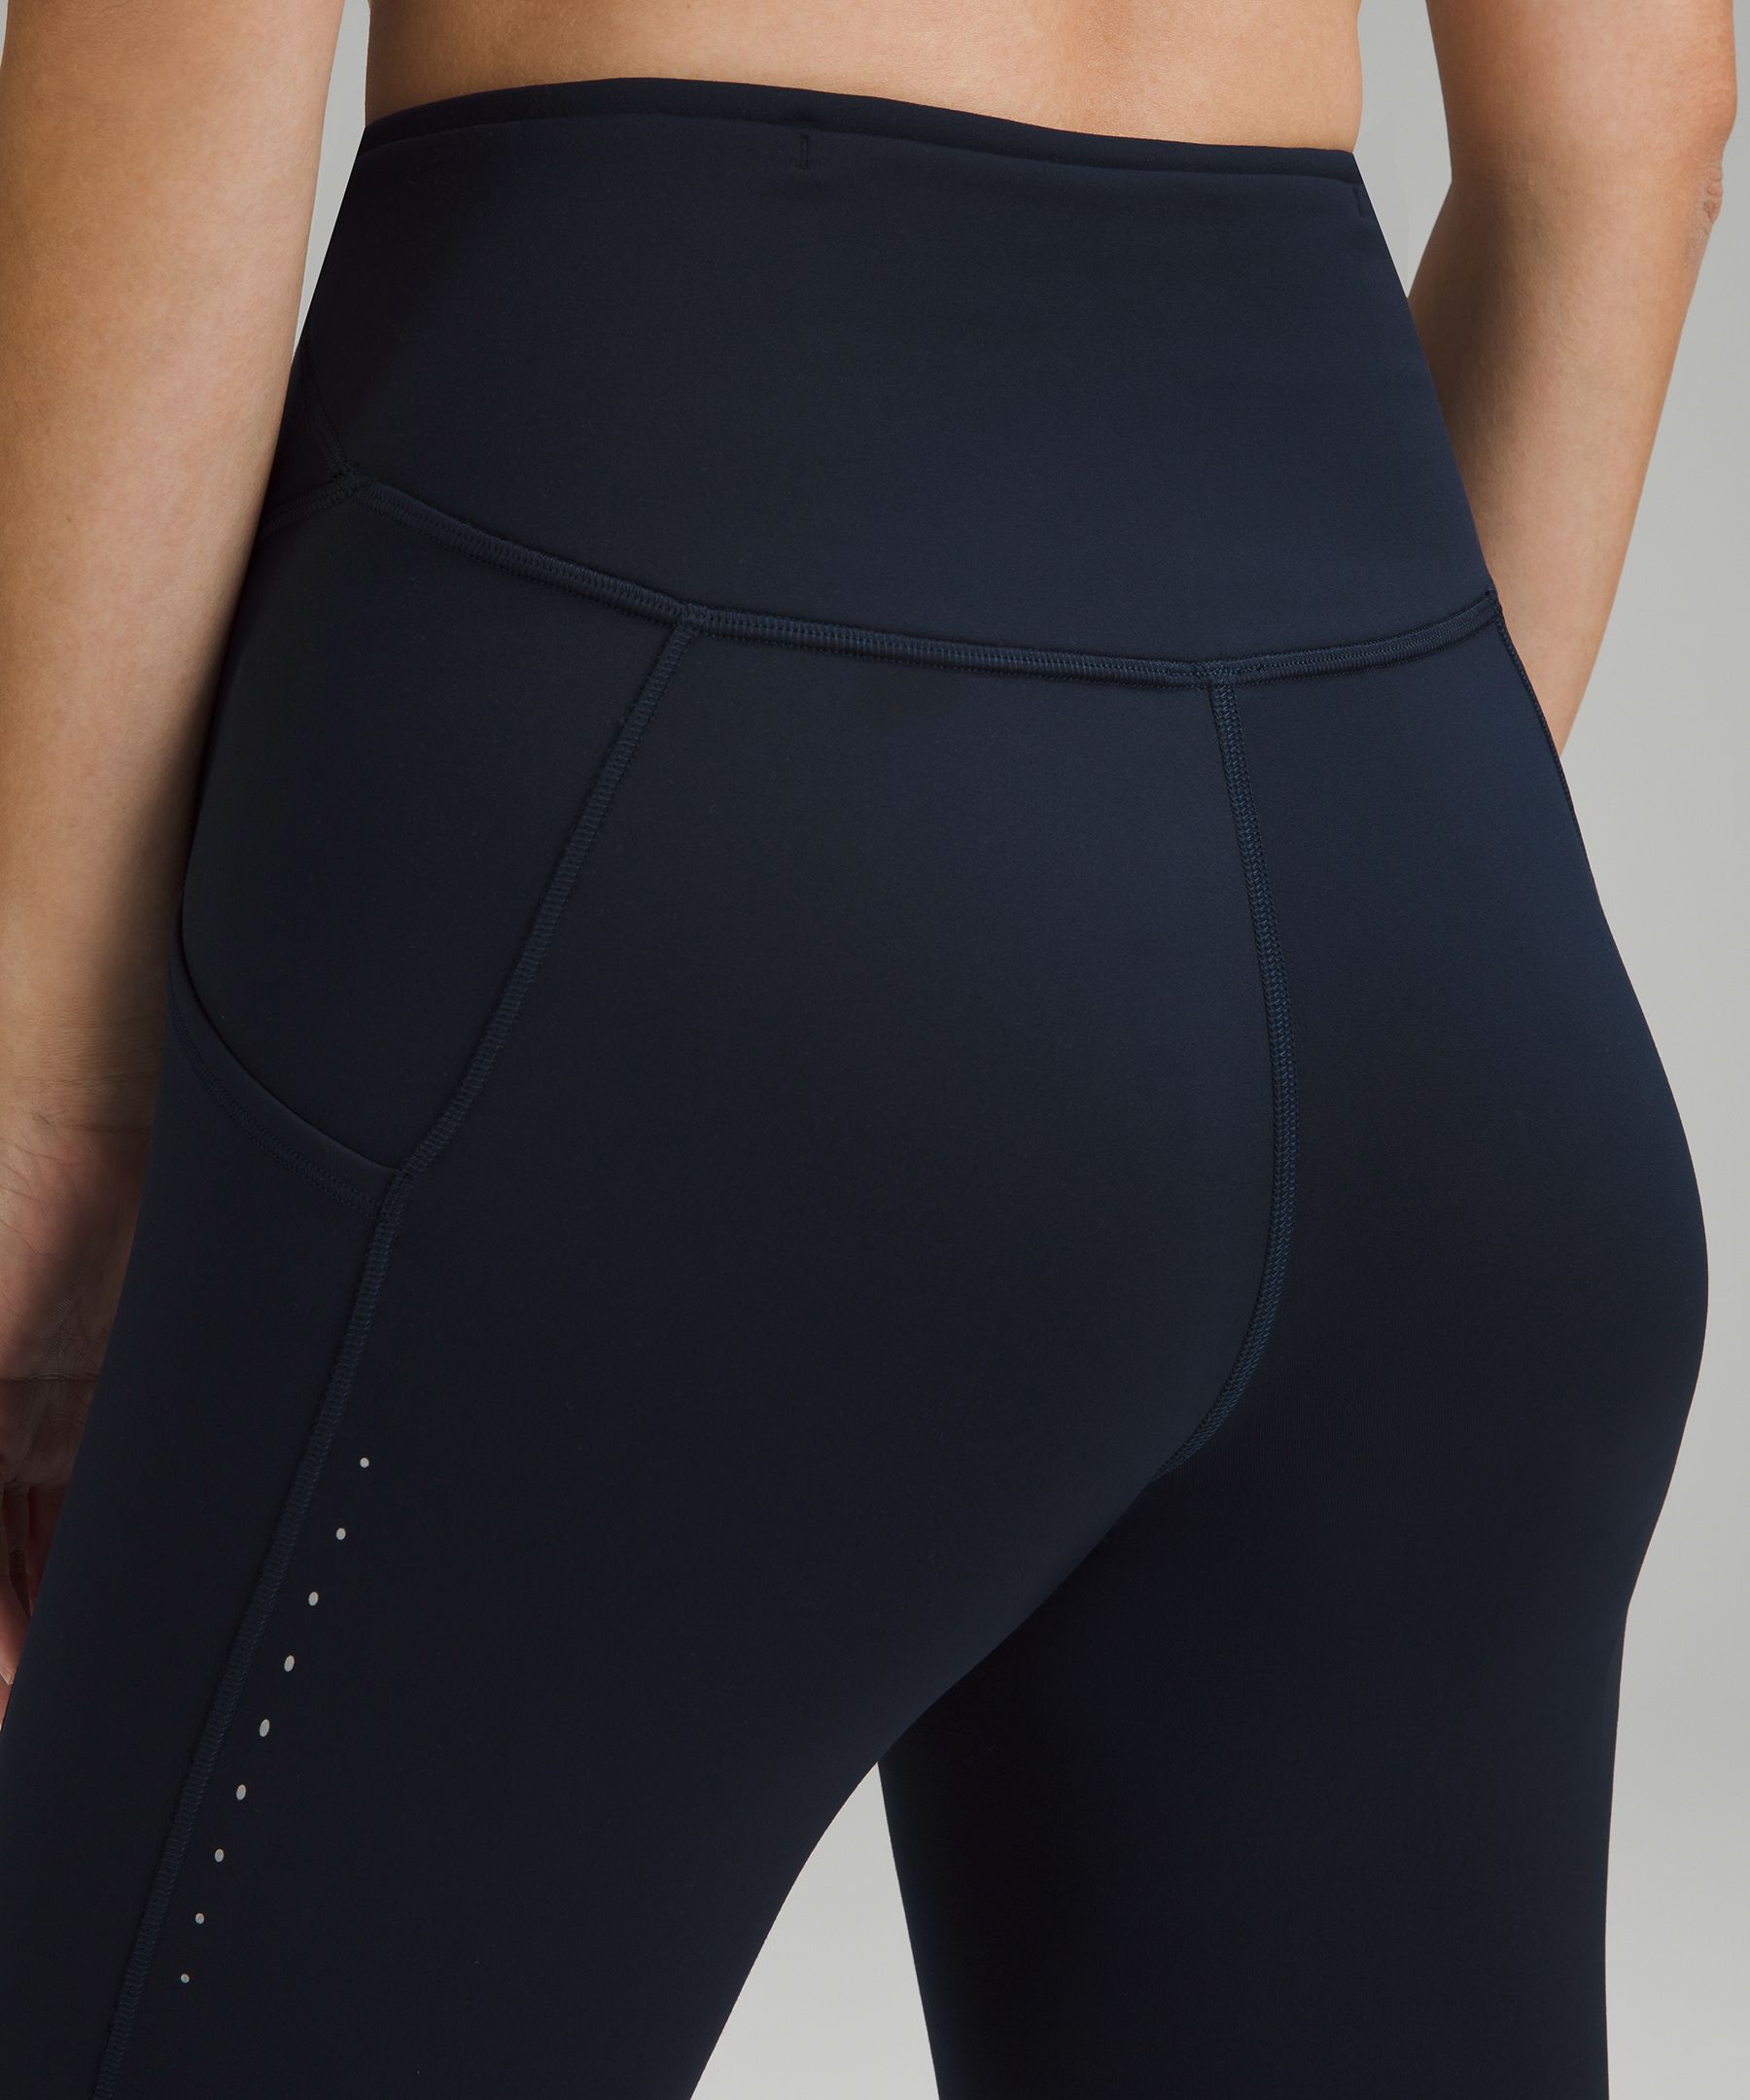 LULULEMON Fast and Free 7/8 Tight 25 (Black (Non-Reflective), 6